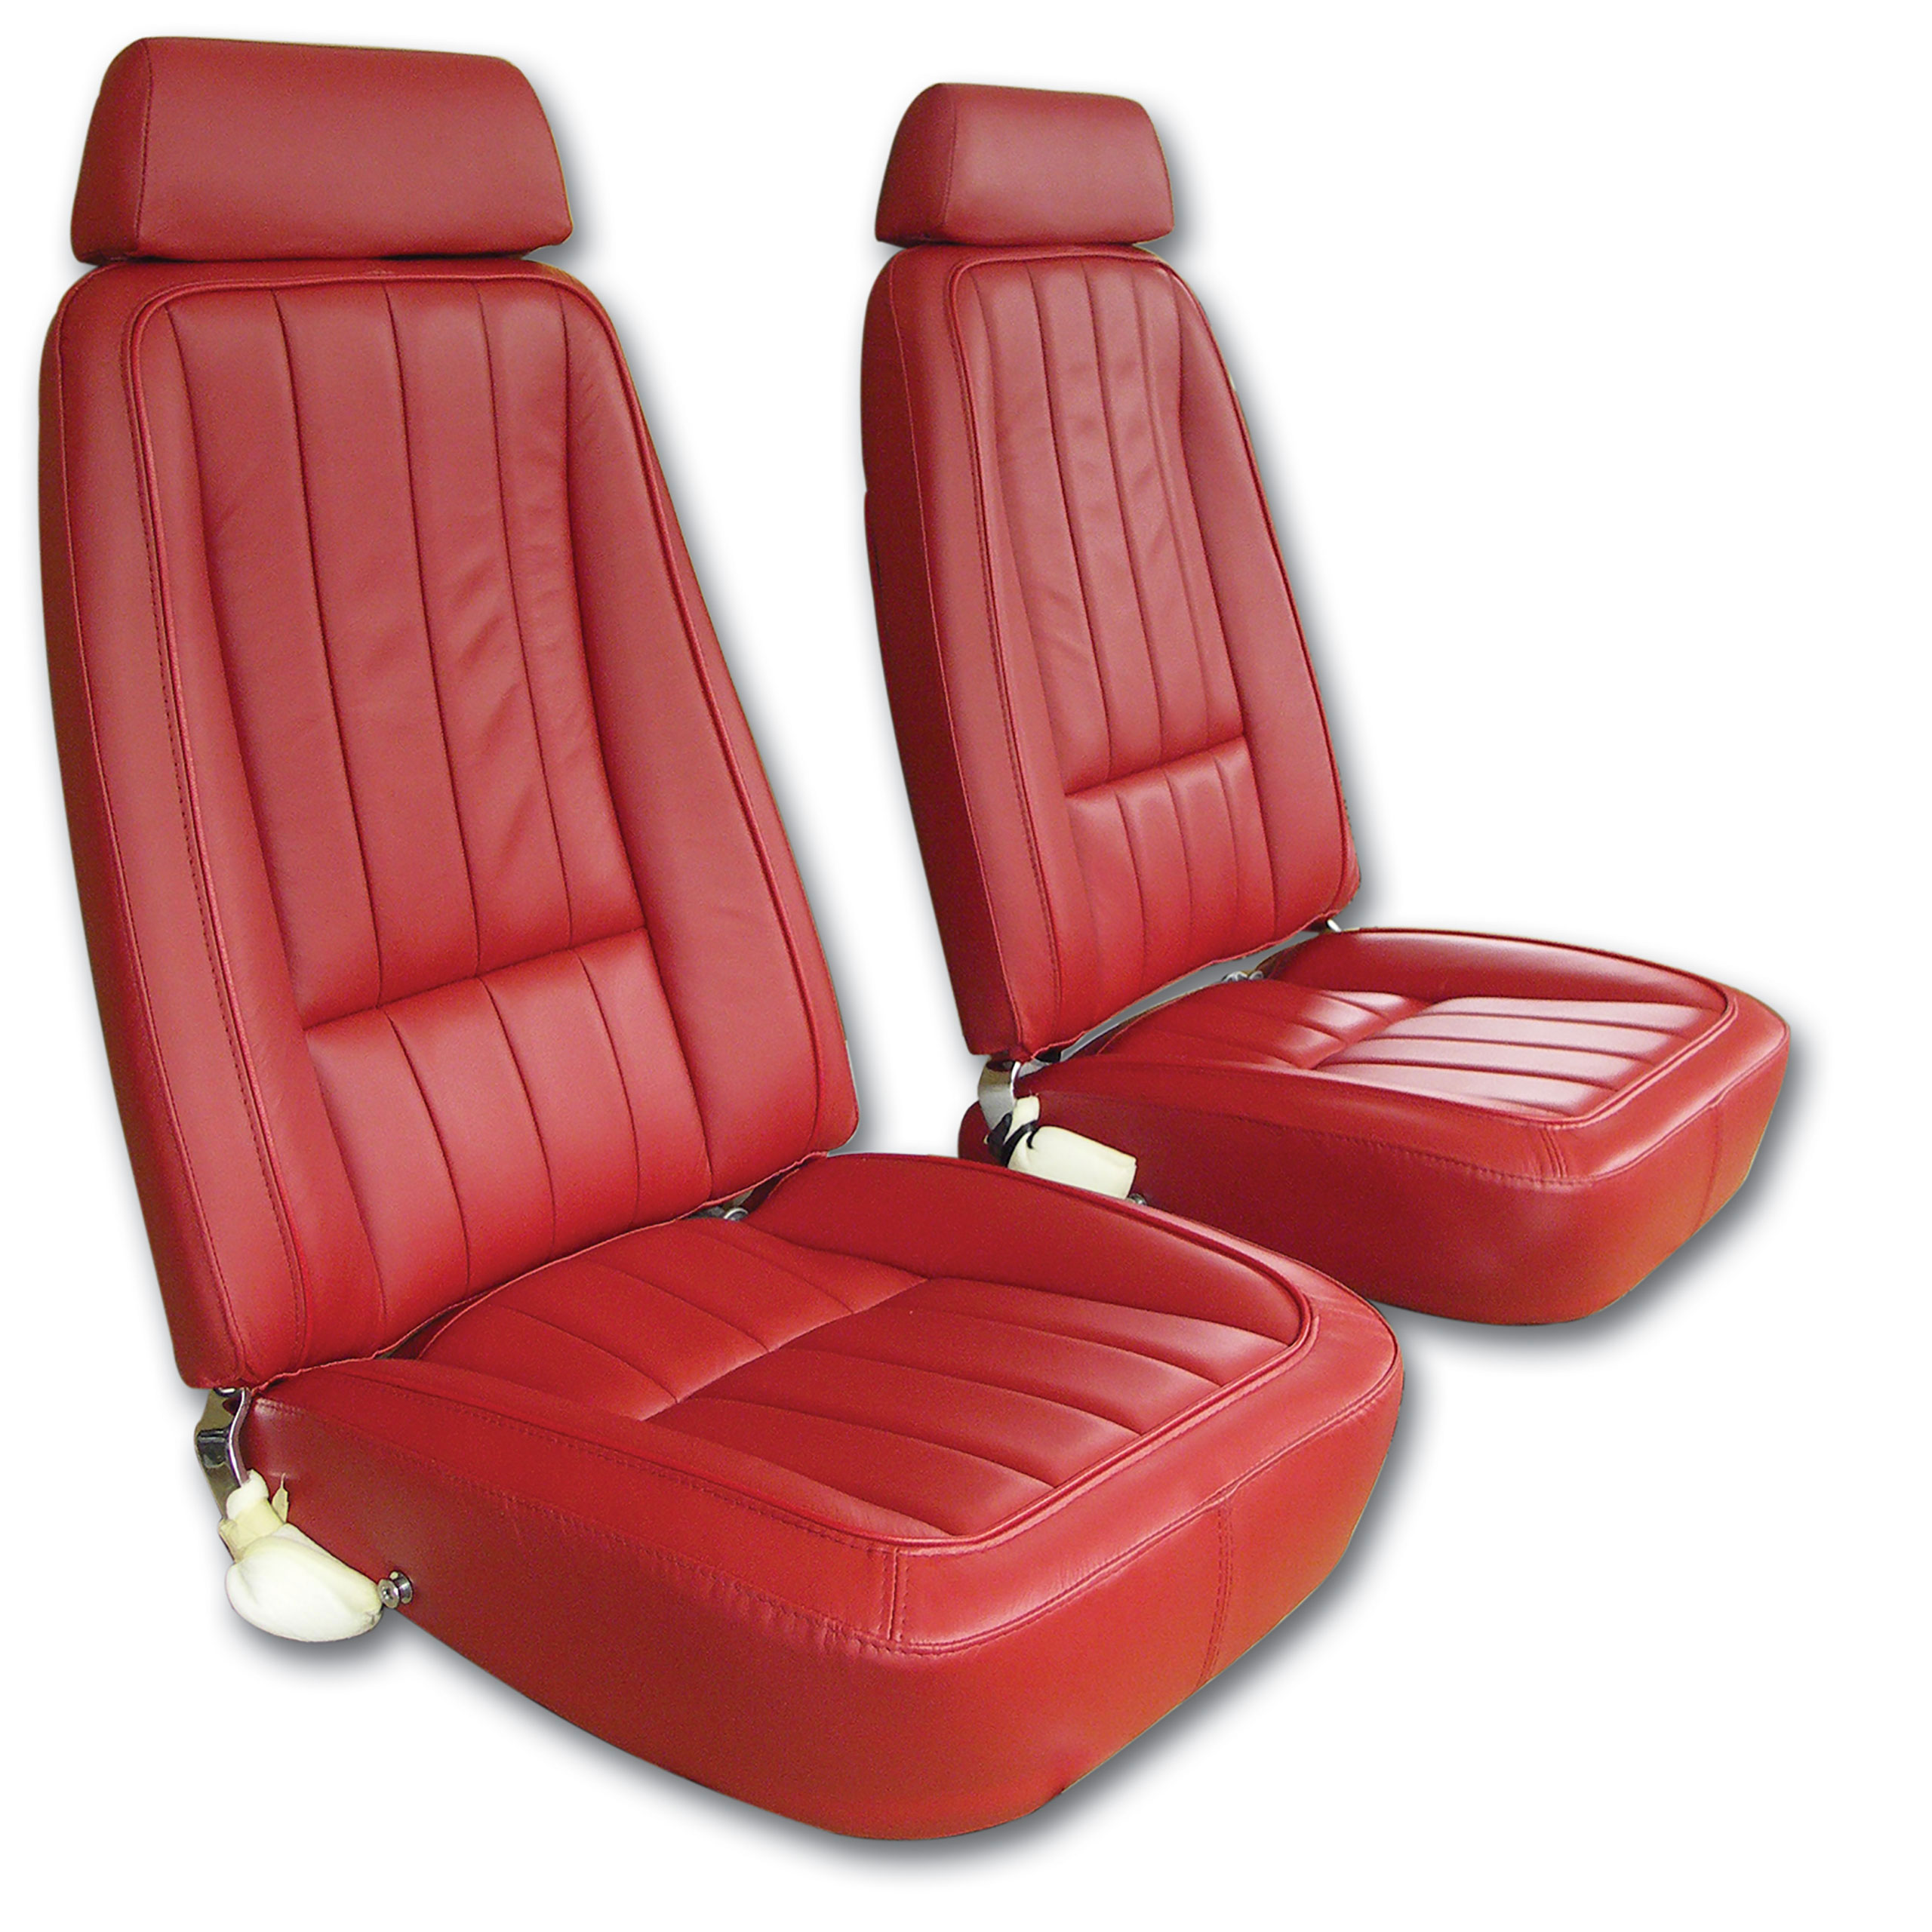 1969 C3 Corvette Mounted Seats Red "Leather-Like" Vinyl Without Headrest Bracket